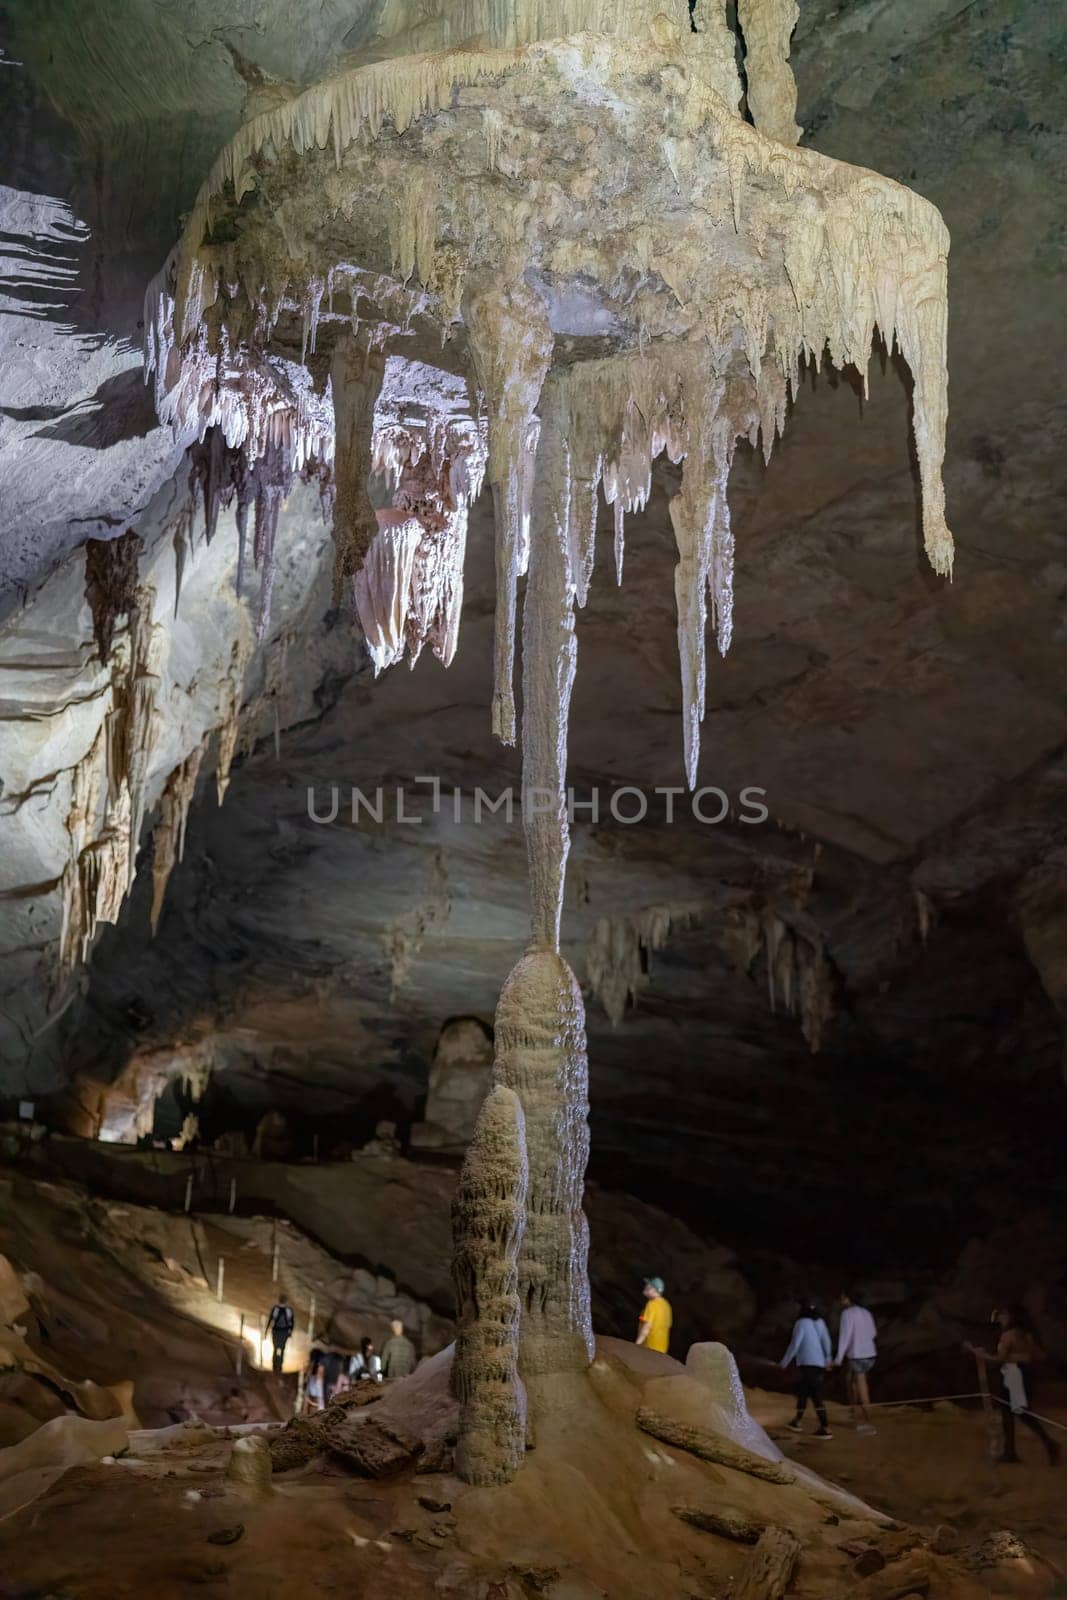 Explorers discover a vast cave filled with striking stalactites and stalagmites.